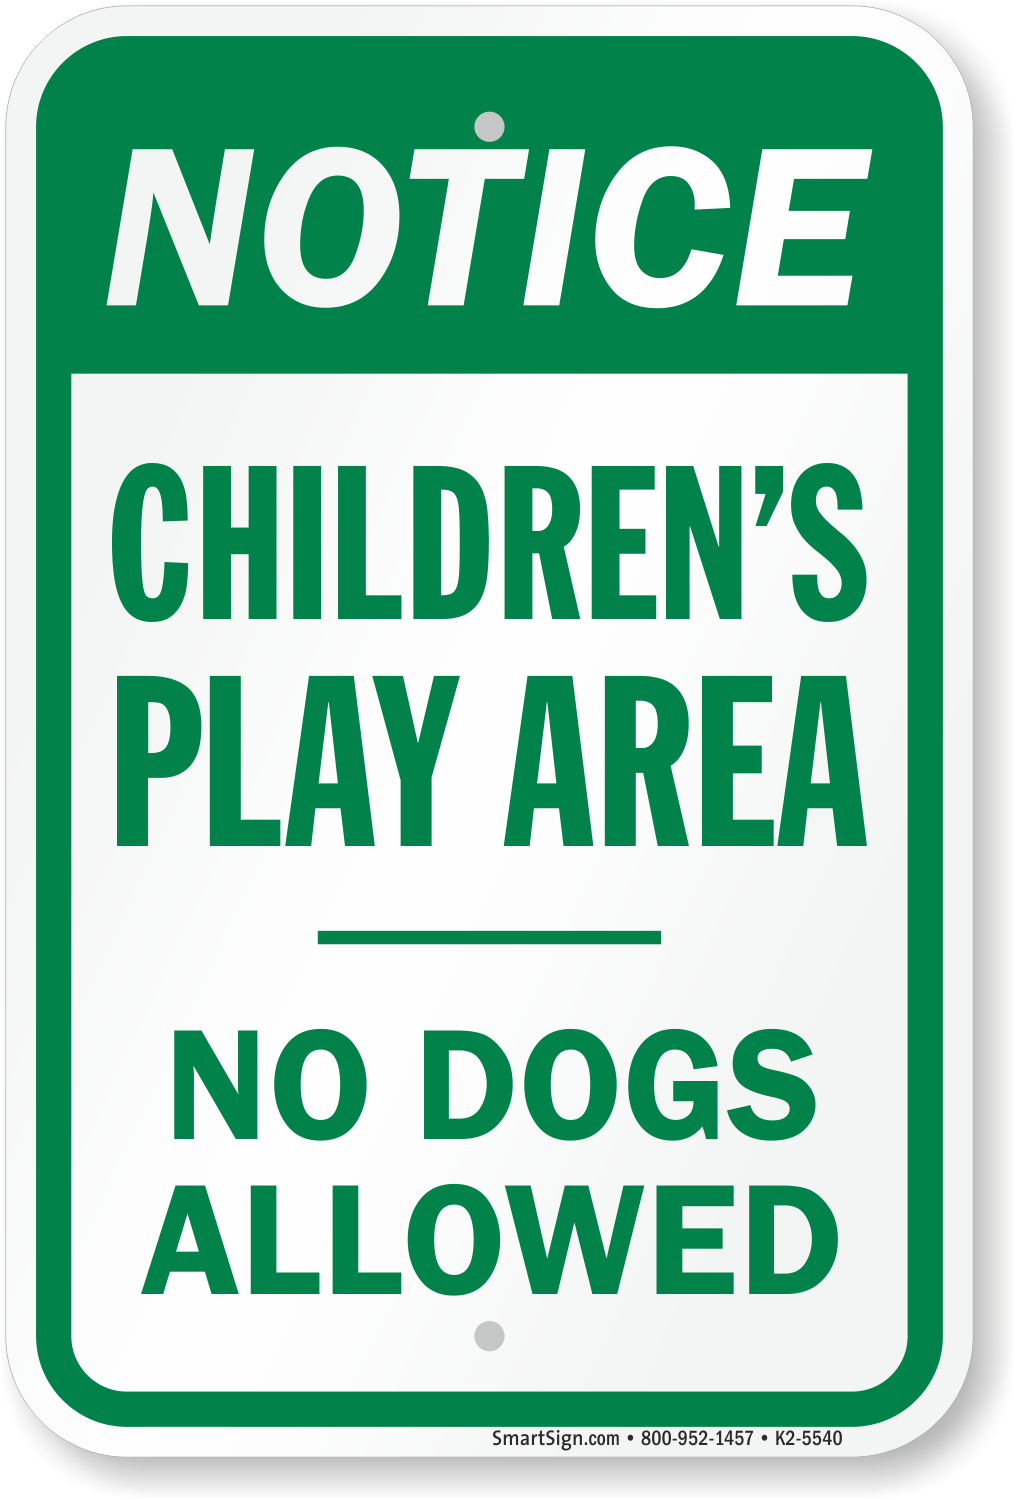 No dogs childrens play area Health and safety signs COUN0083 